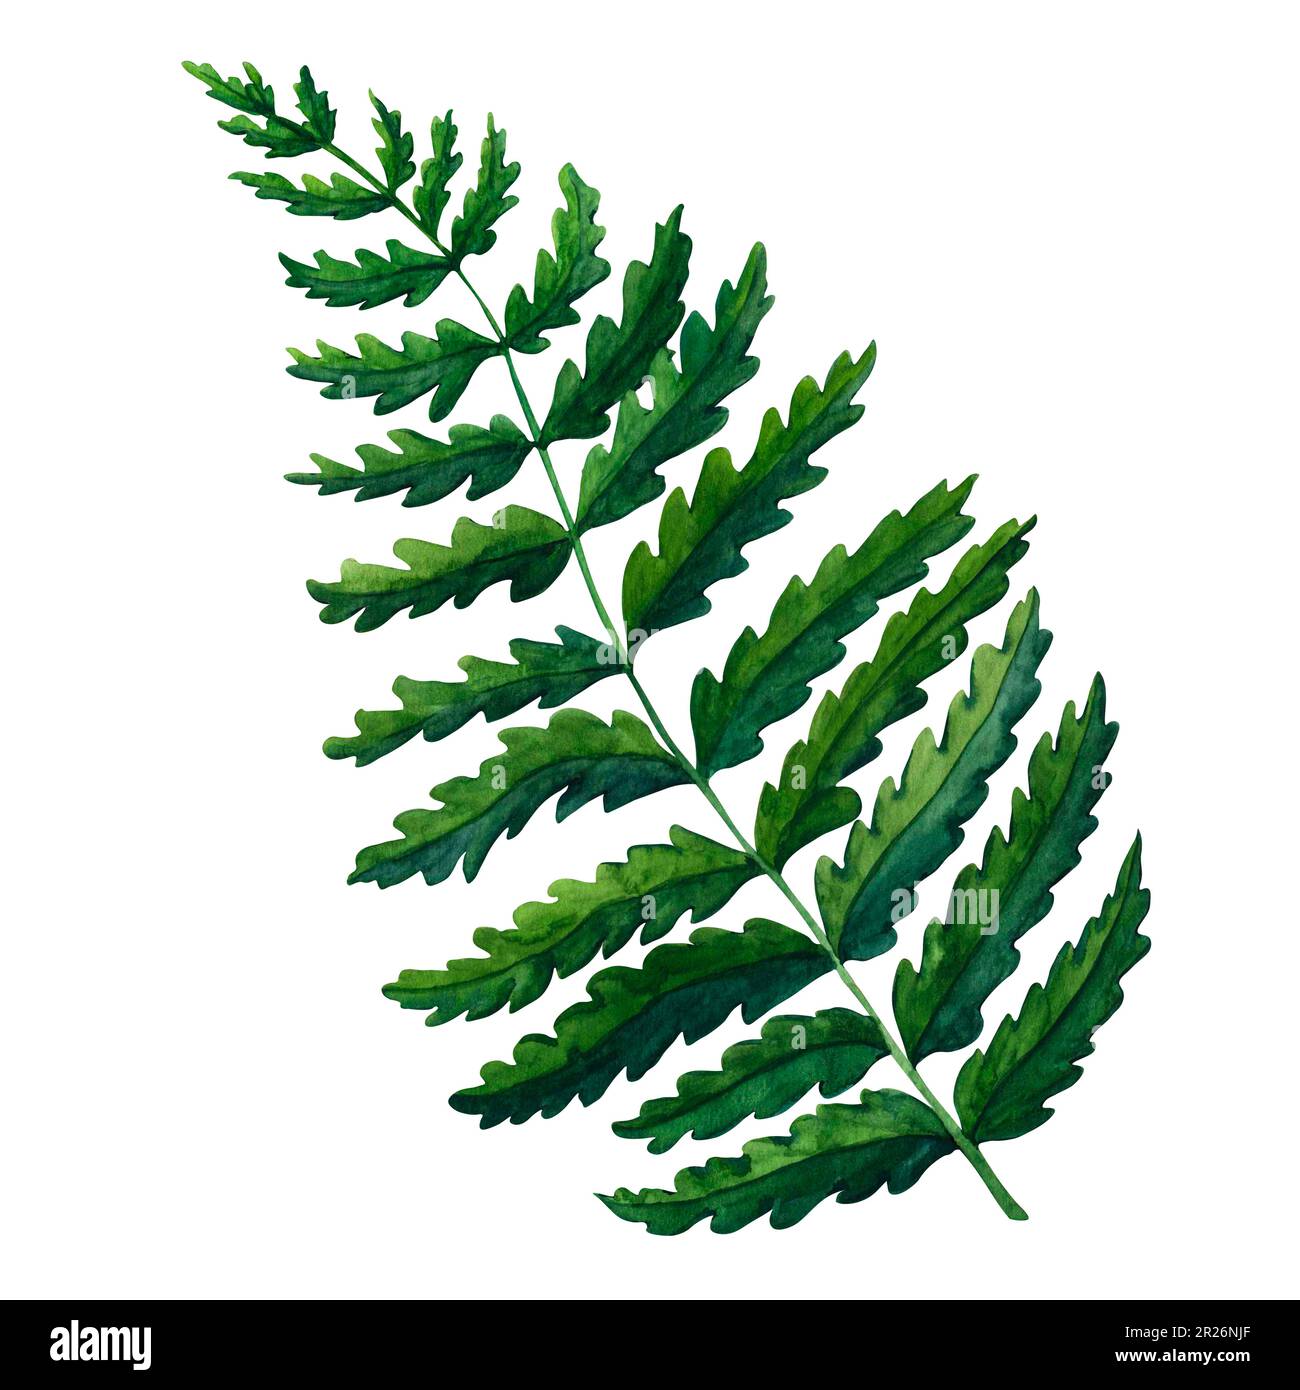 Fern watercolor hand painted illustration in green colors, greenery branch, twig, stem, forest plant isolated on white background for wall art. Clip Stock Photo